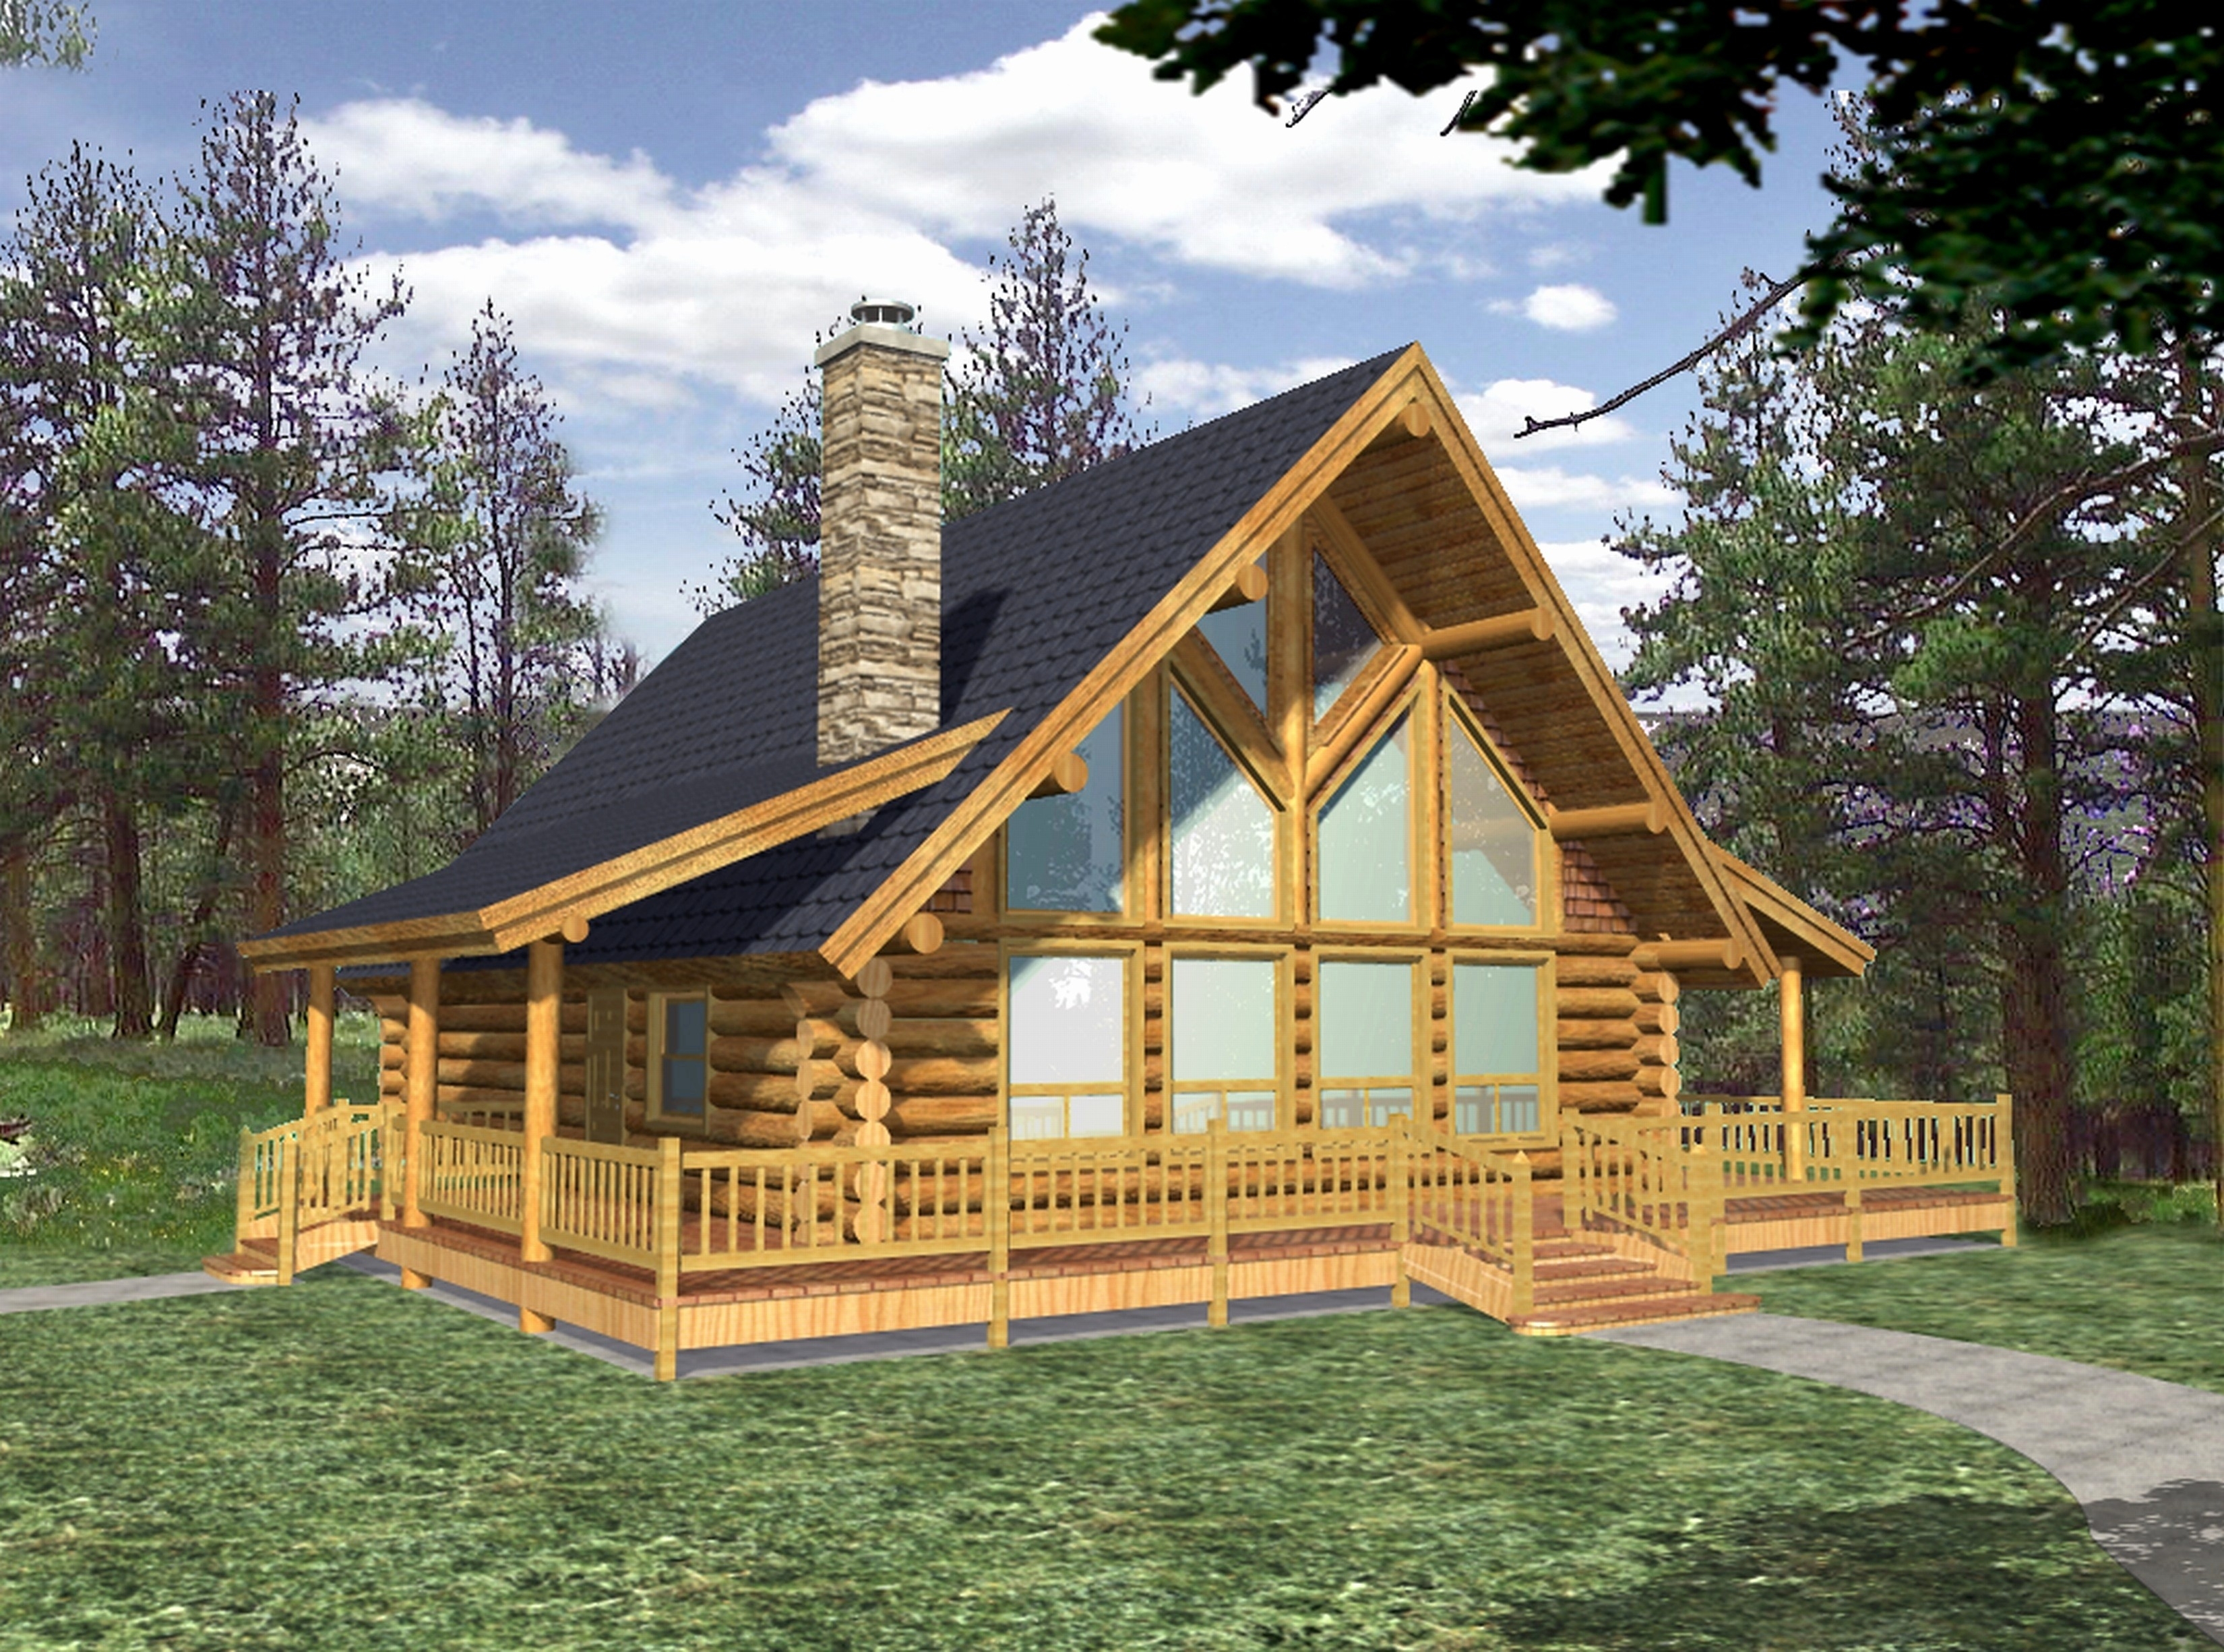 Exterio Log Cabin Pictures With Wrap Around Front Porch